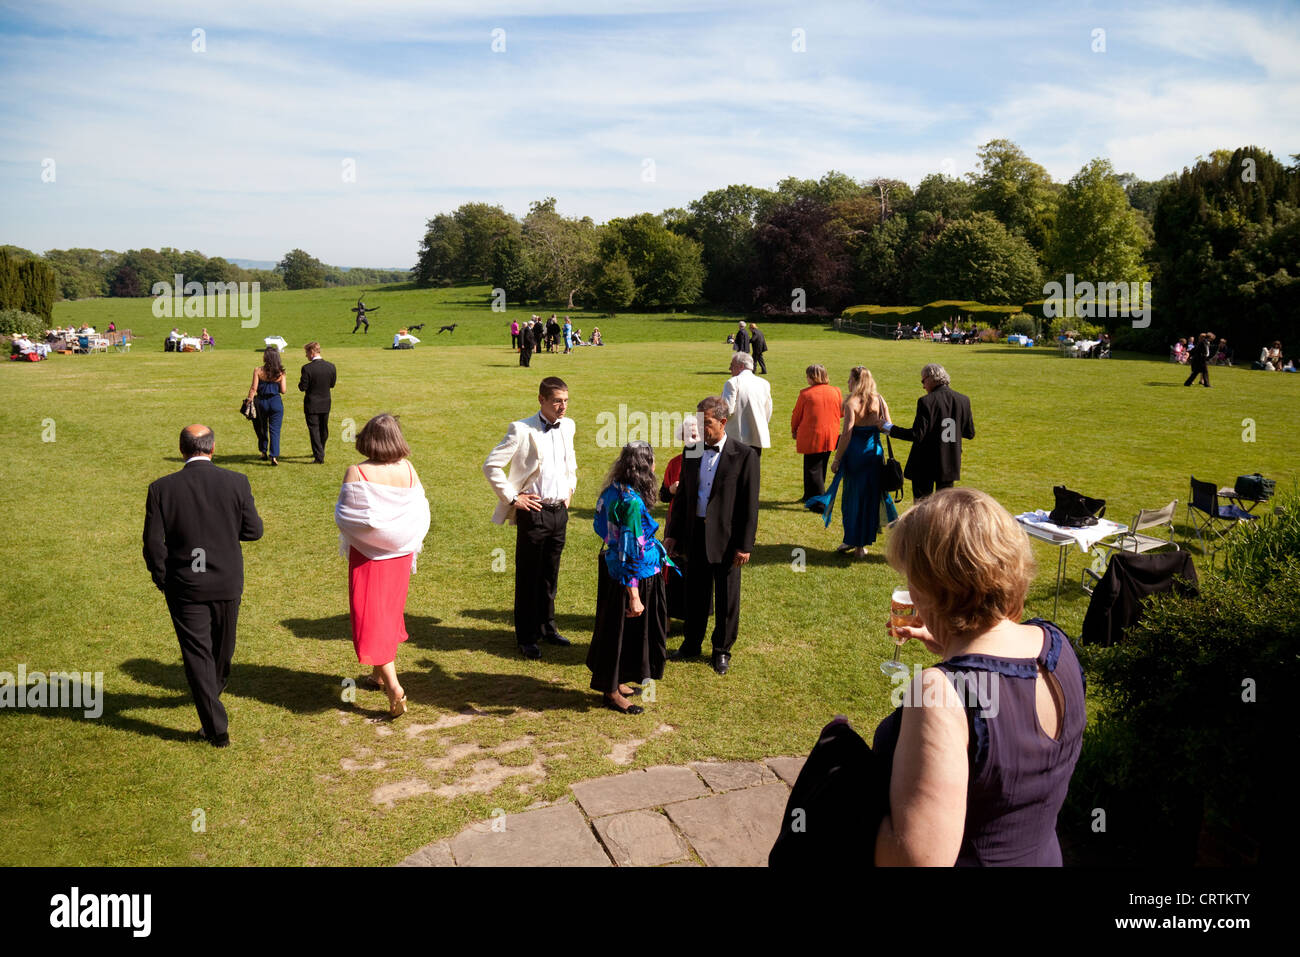 People dressed up on the lawns at the Glyndebourne opera festival, Lewes, Sussex UK Stock Photo